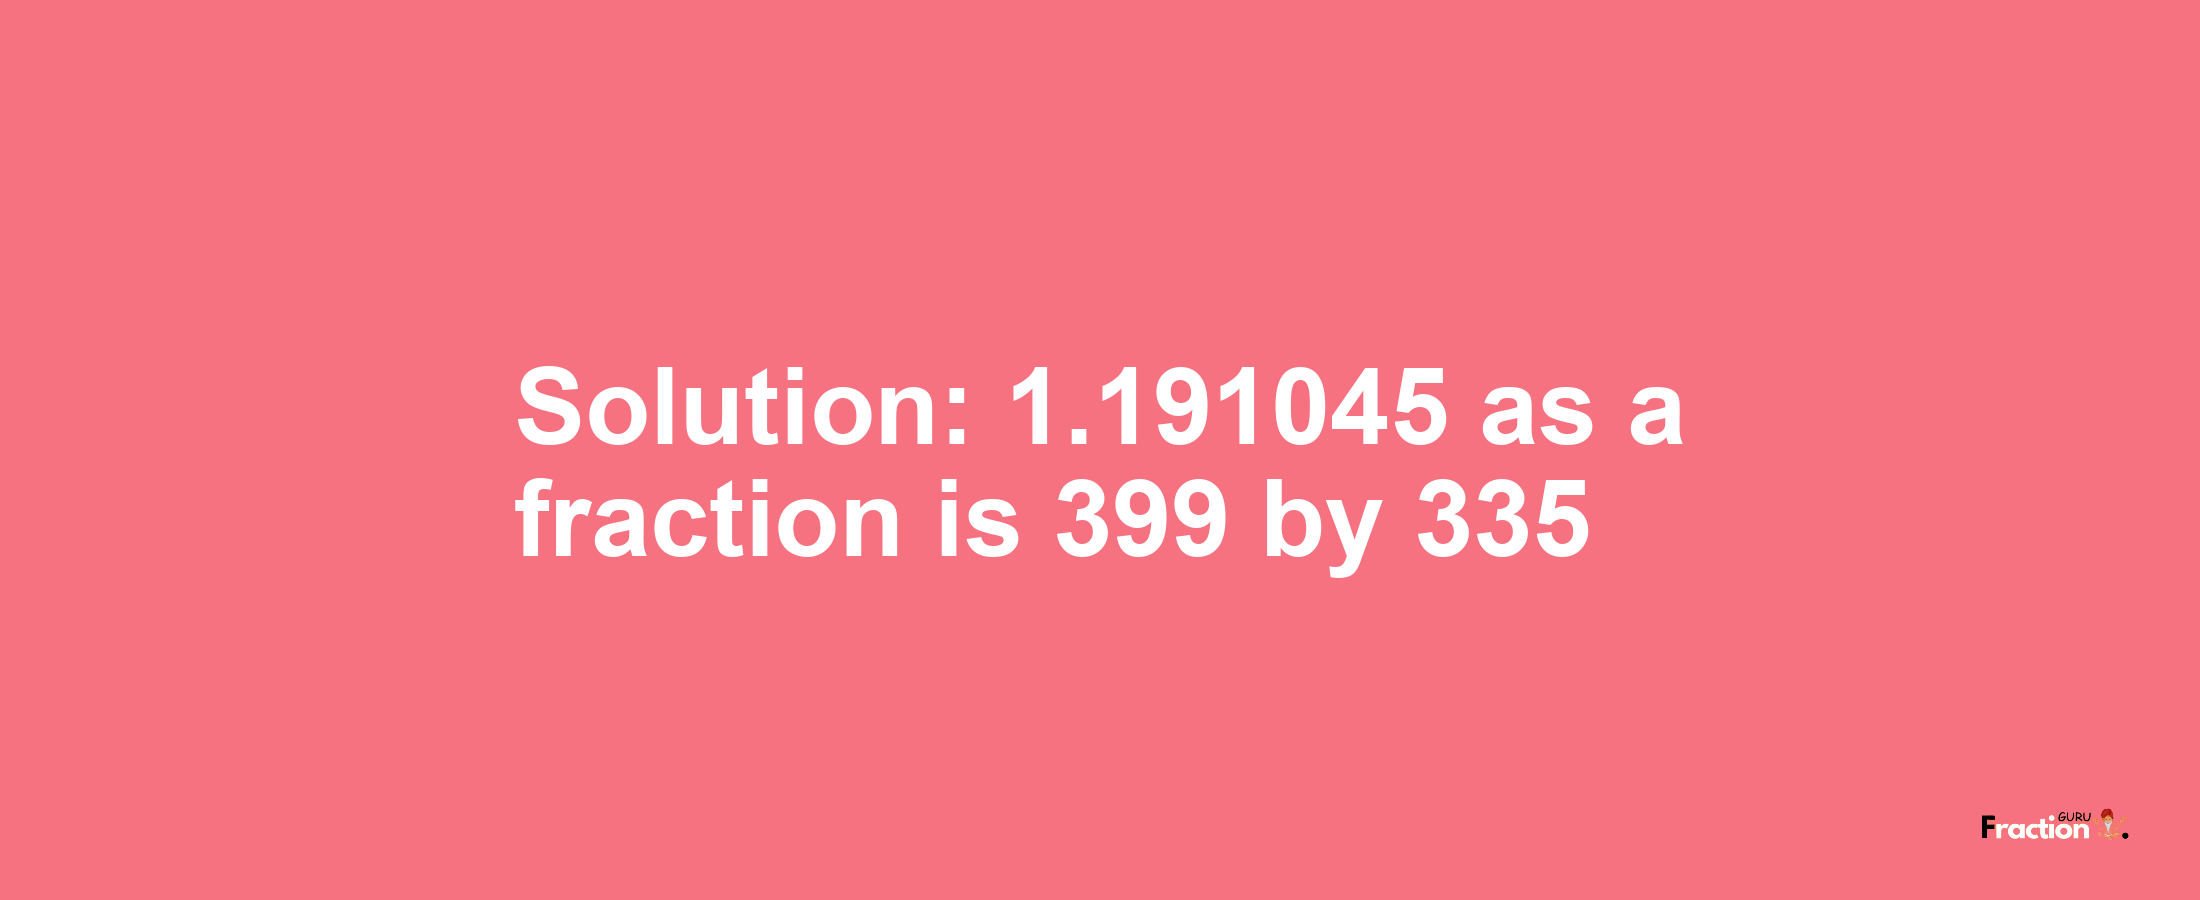 Solution:1.191045 as a fraction is 399/335